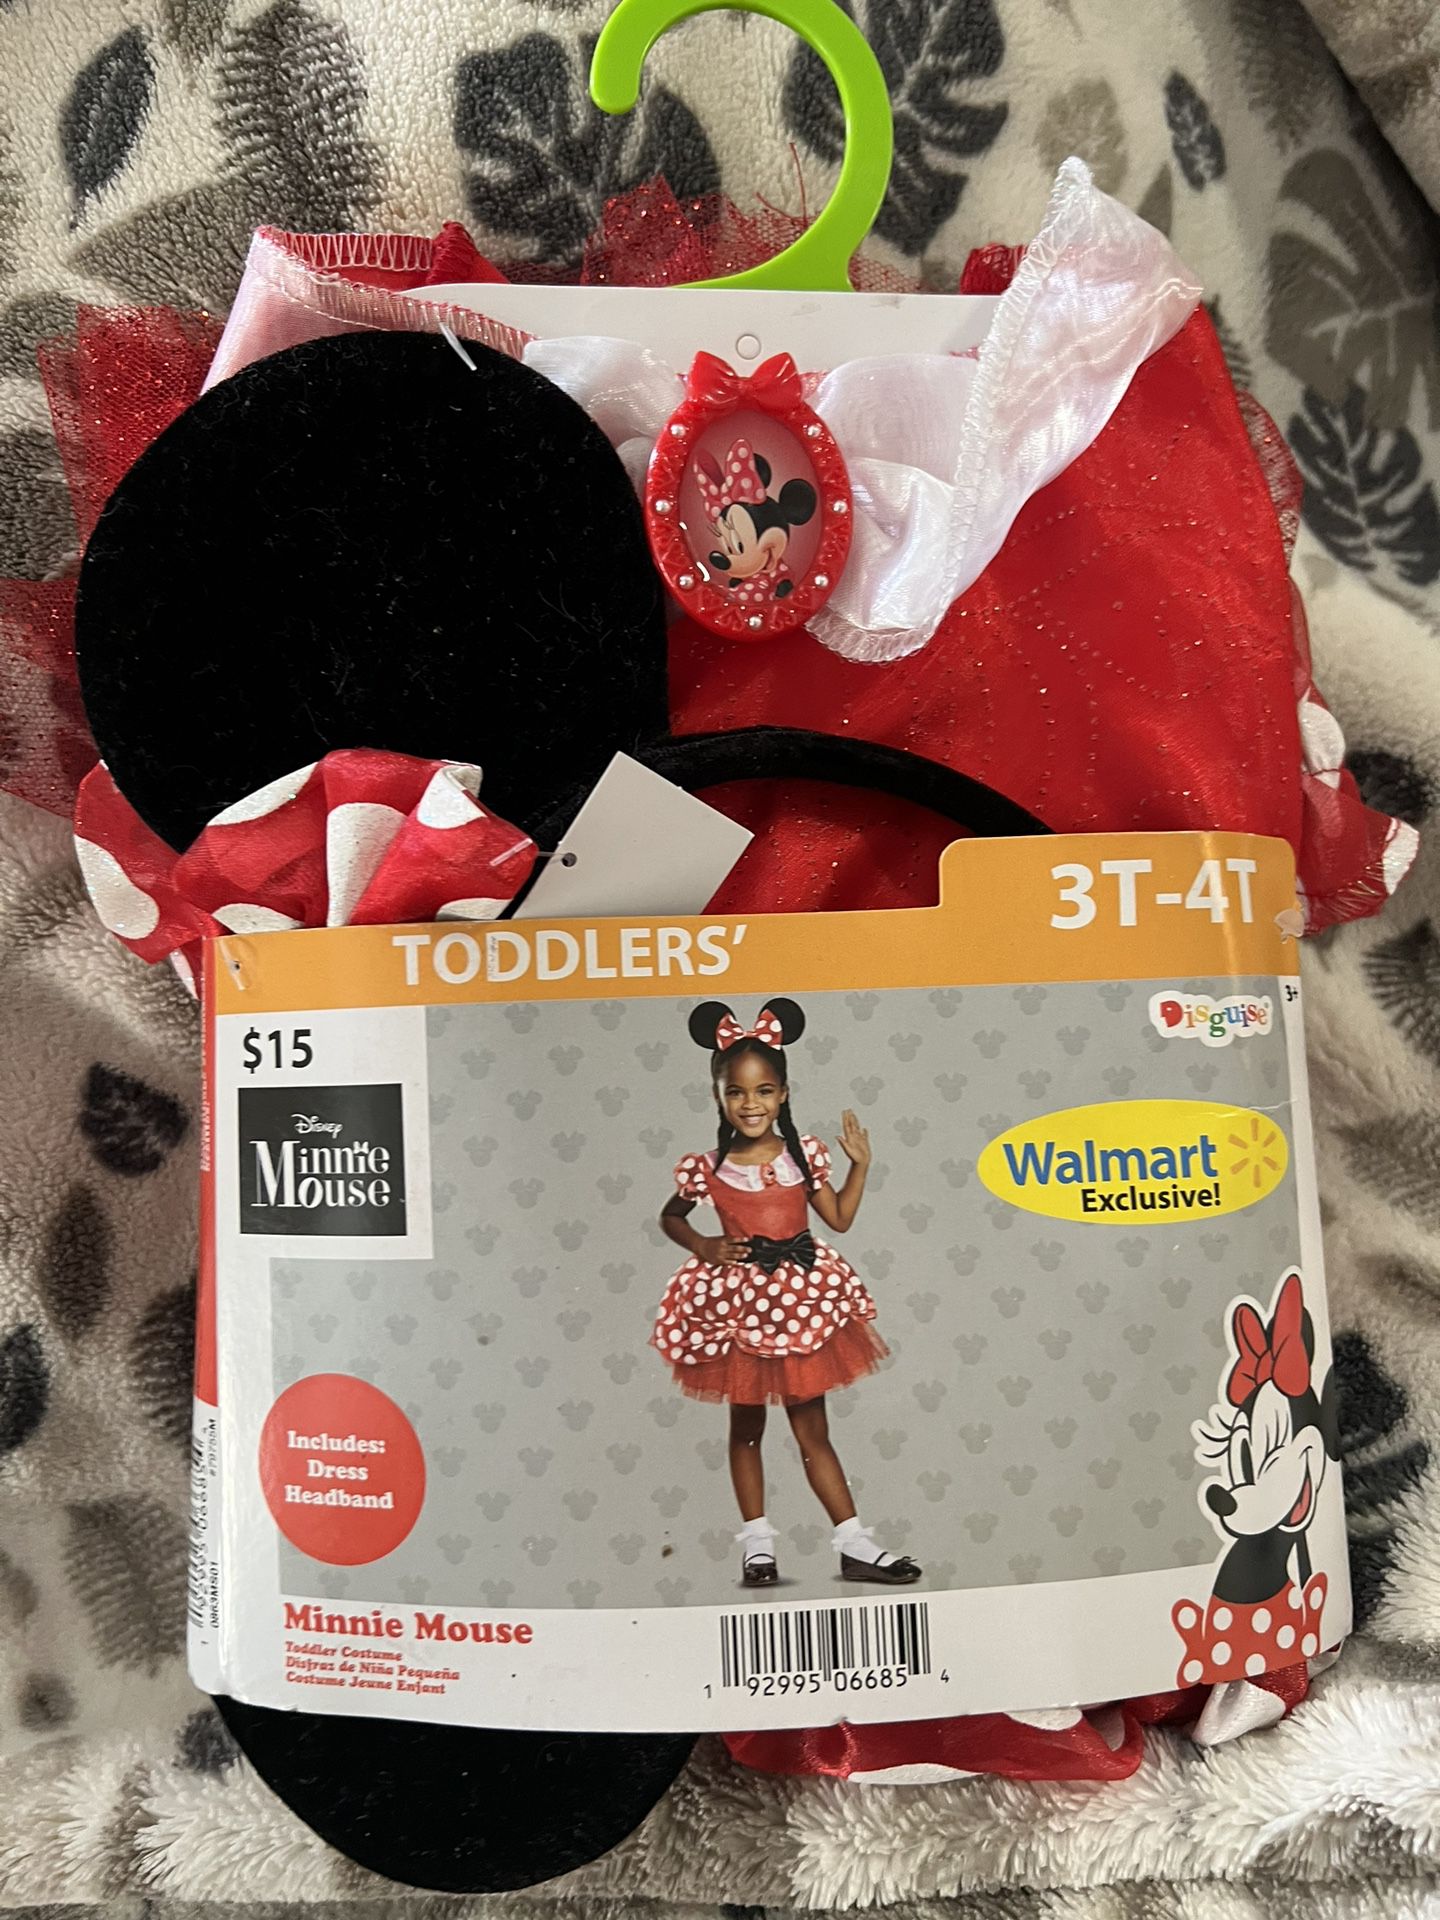 Minnie Mouse Halloween Costume 